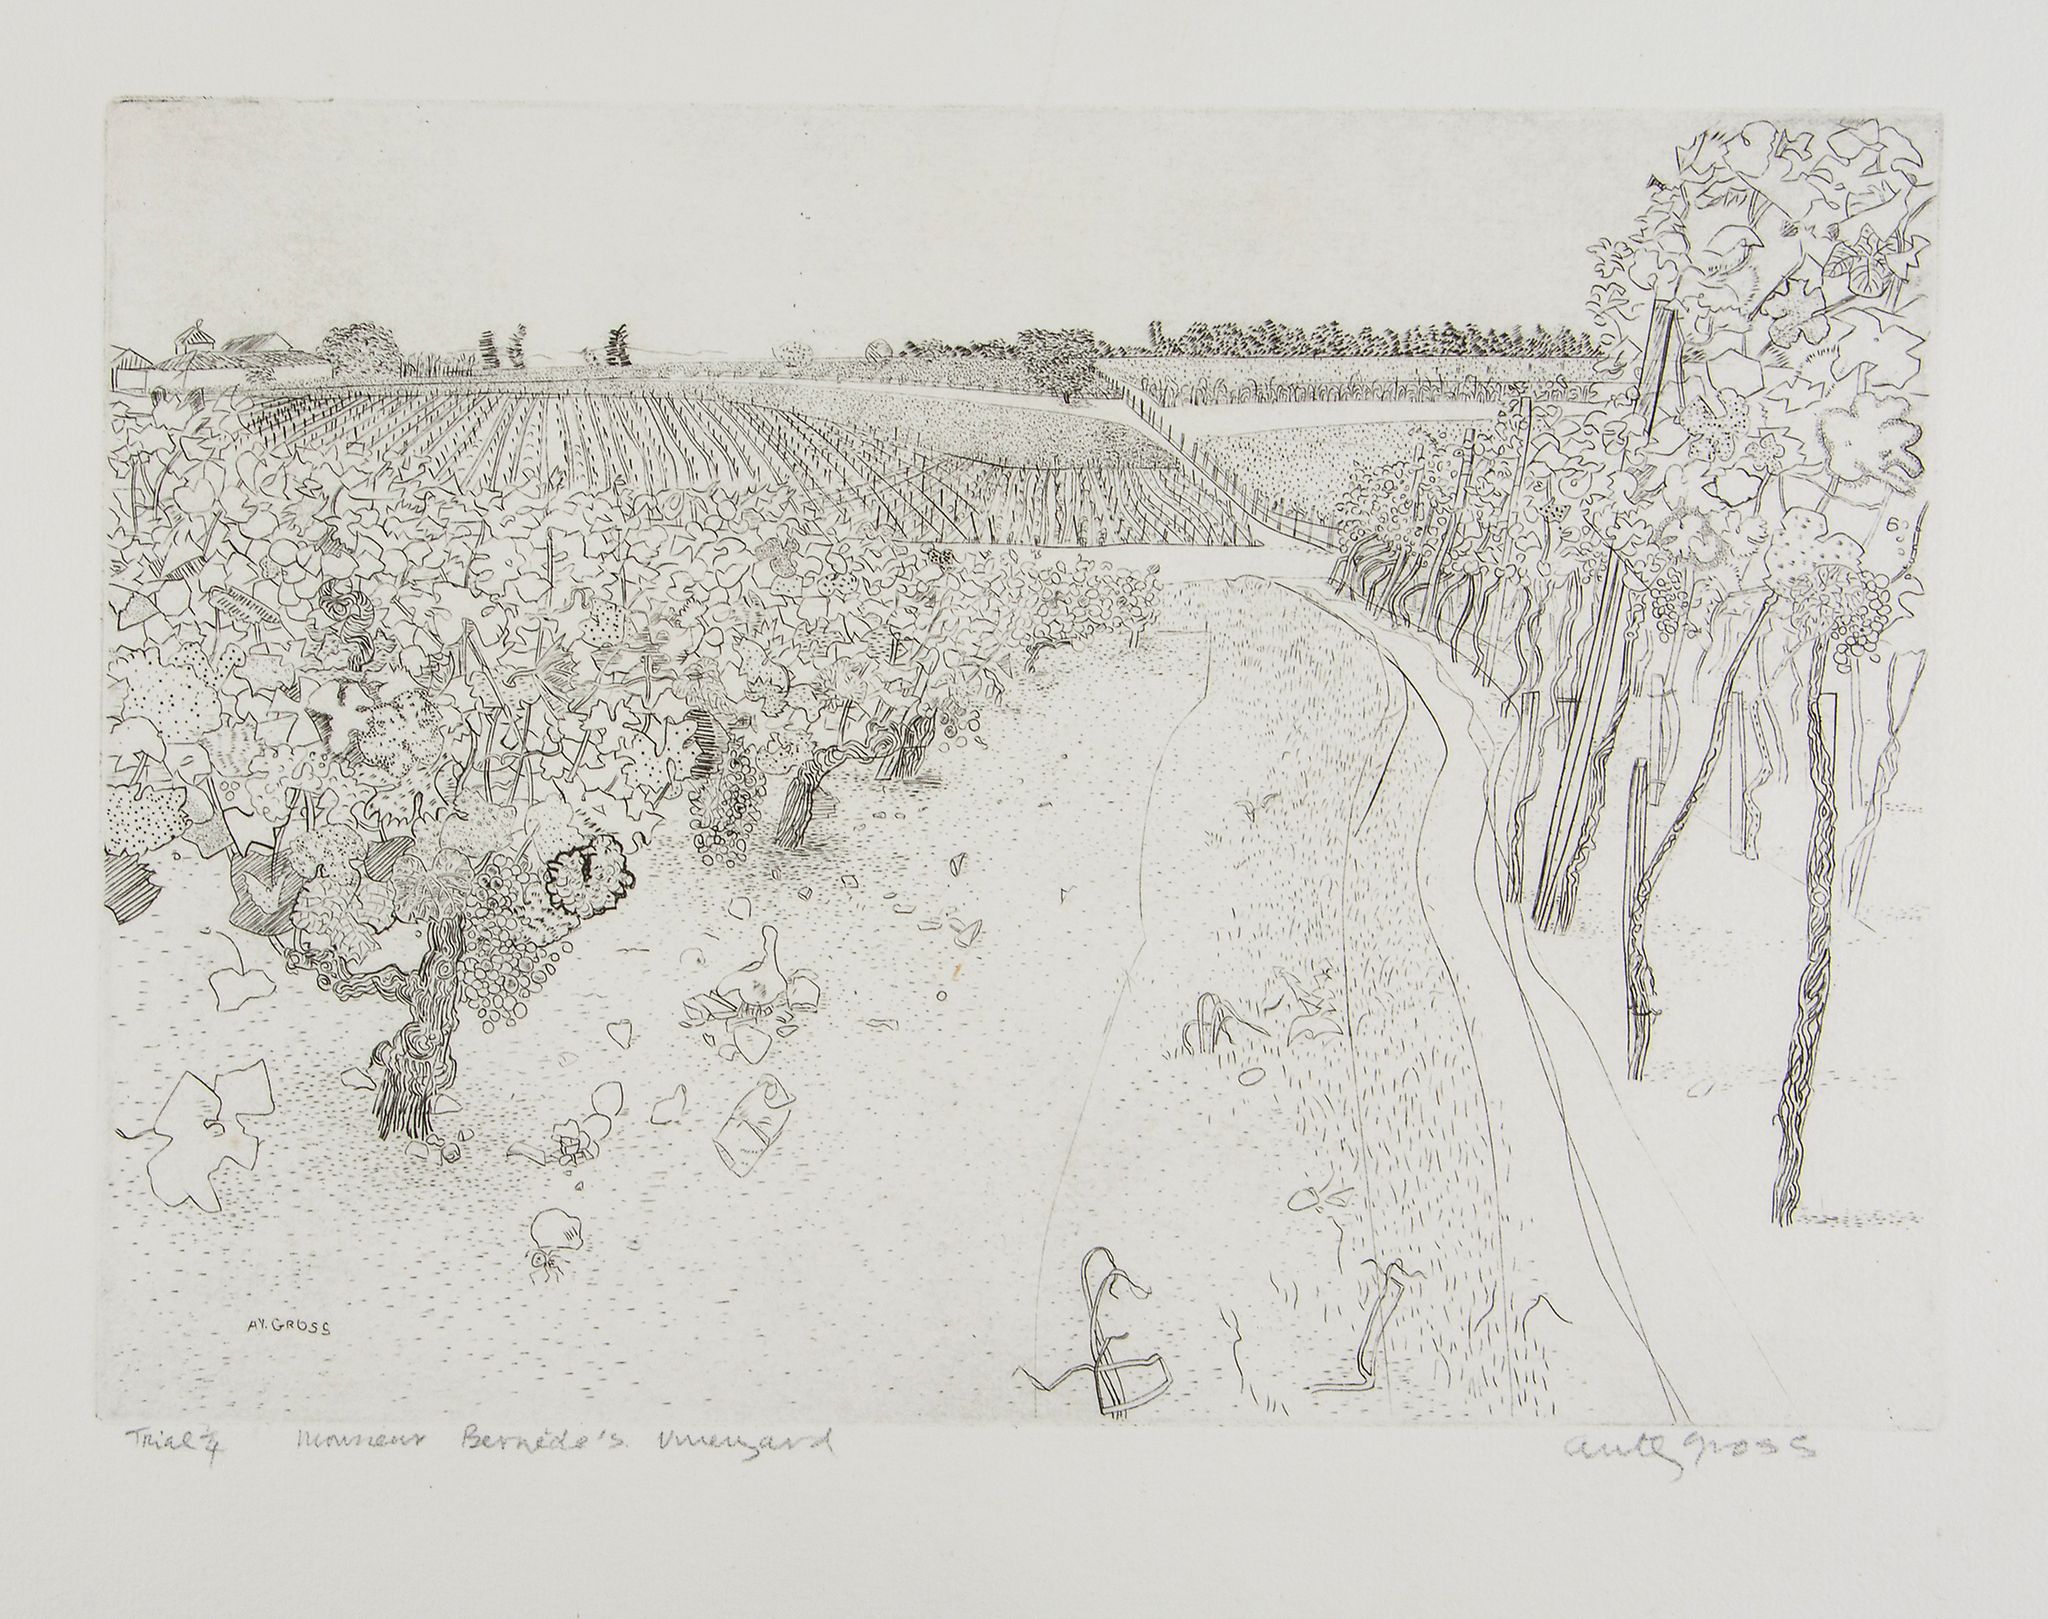 Anthony Gross (1905-1984) - Monsieur Bernede's Vineyard etching,  1974, signed, titled and inscribed